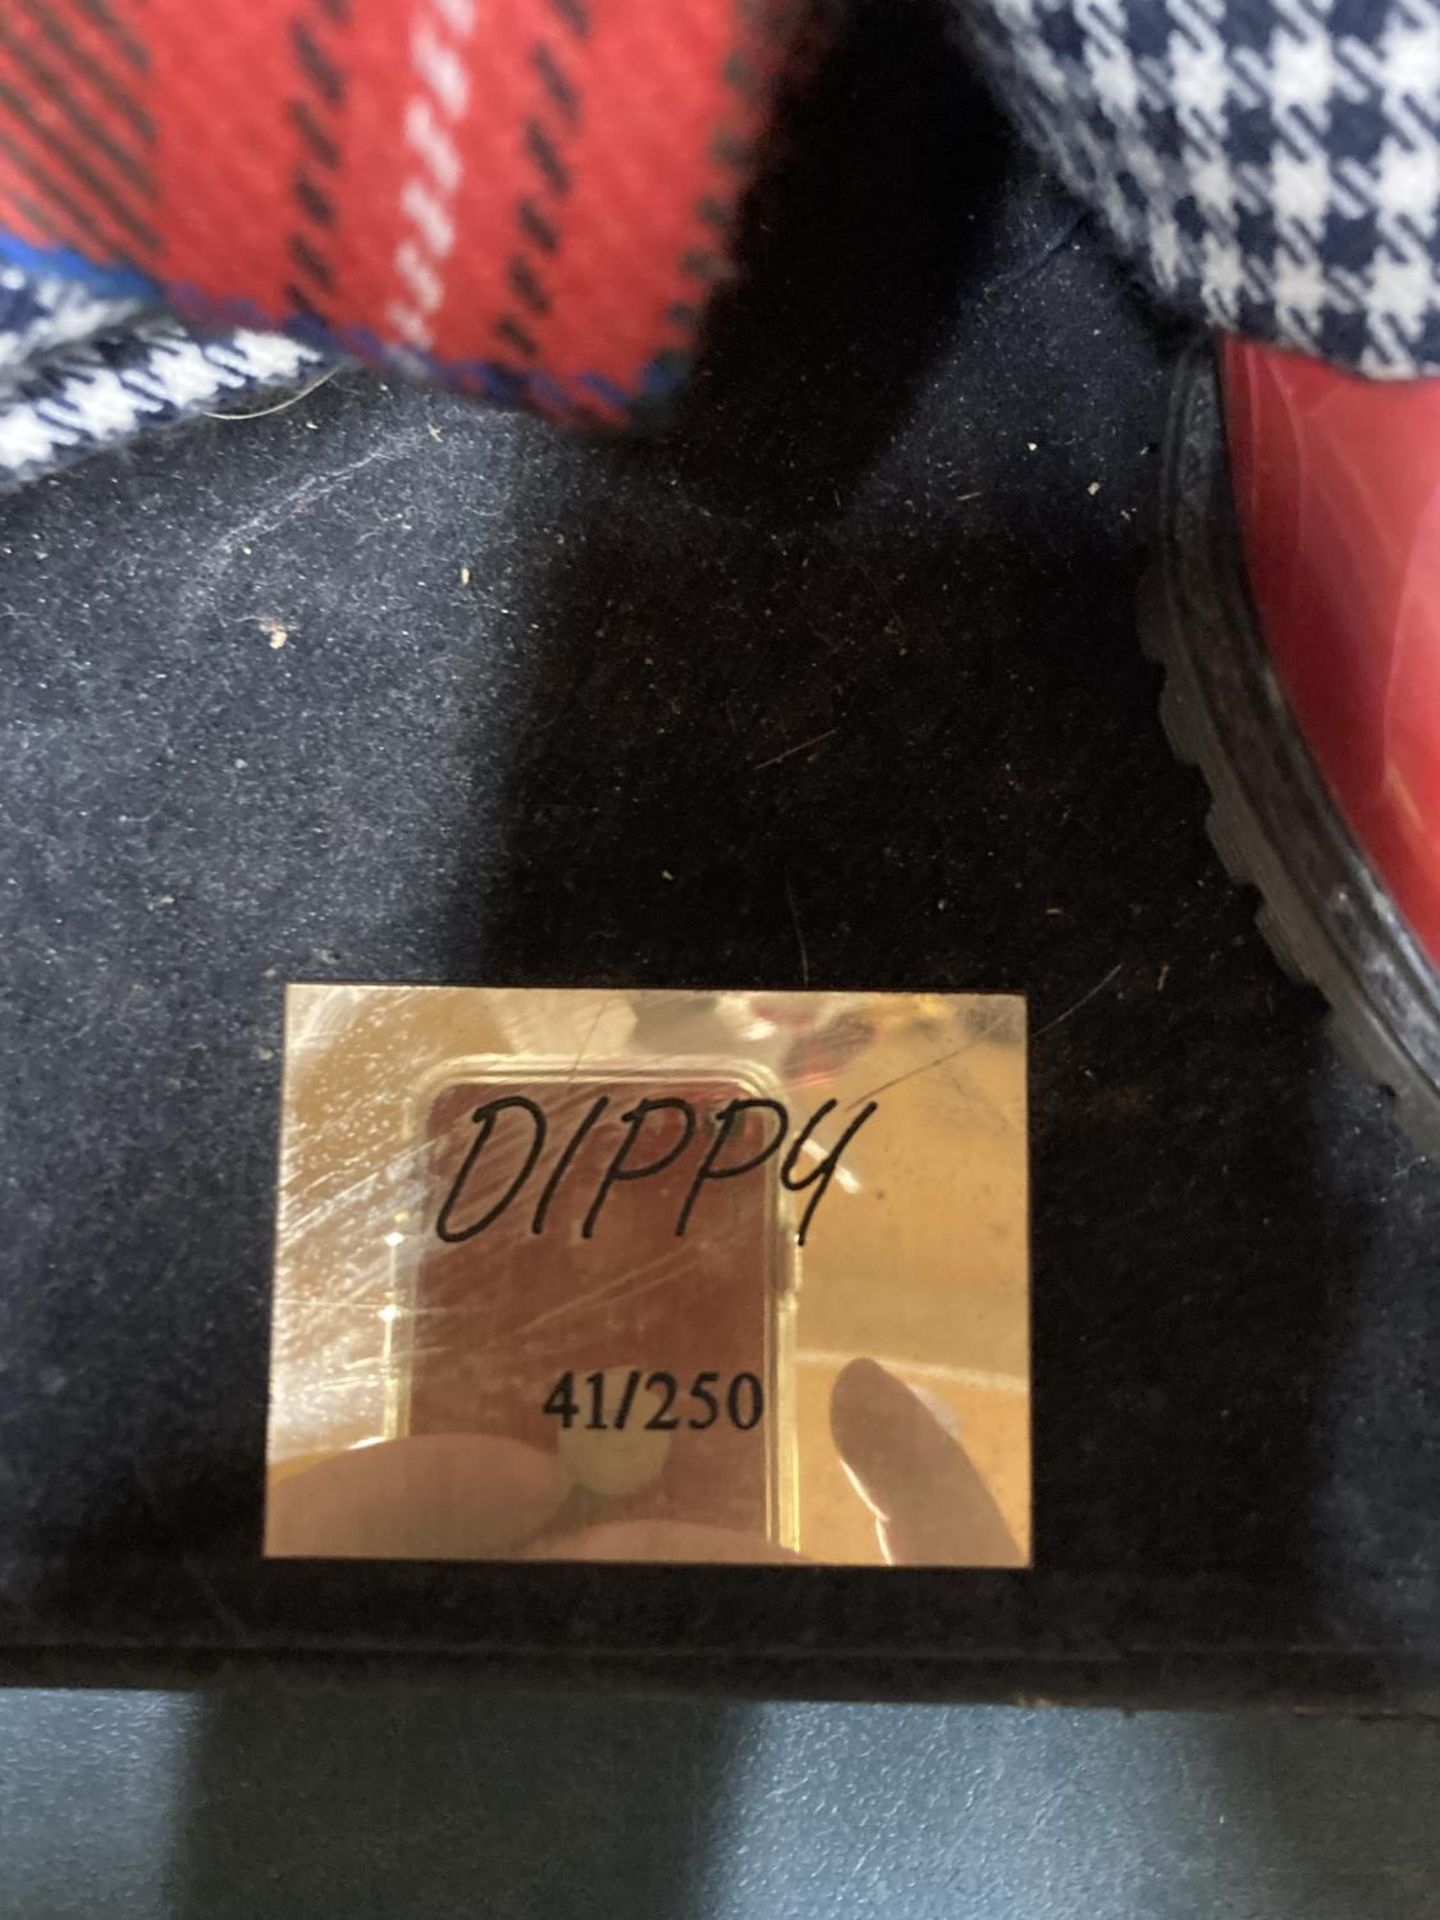 A STAND UPS BY HOBO CLOWN NAMED "DIPPY" WITH CERTIFICATE OF AUTHENTICITY - Bild 5 aus 5